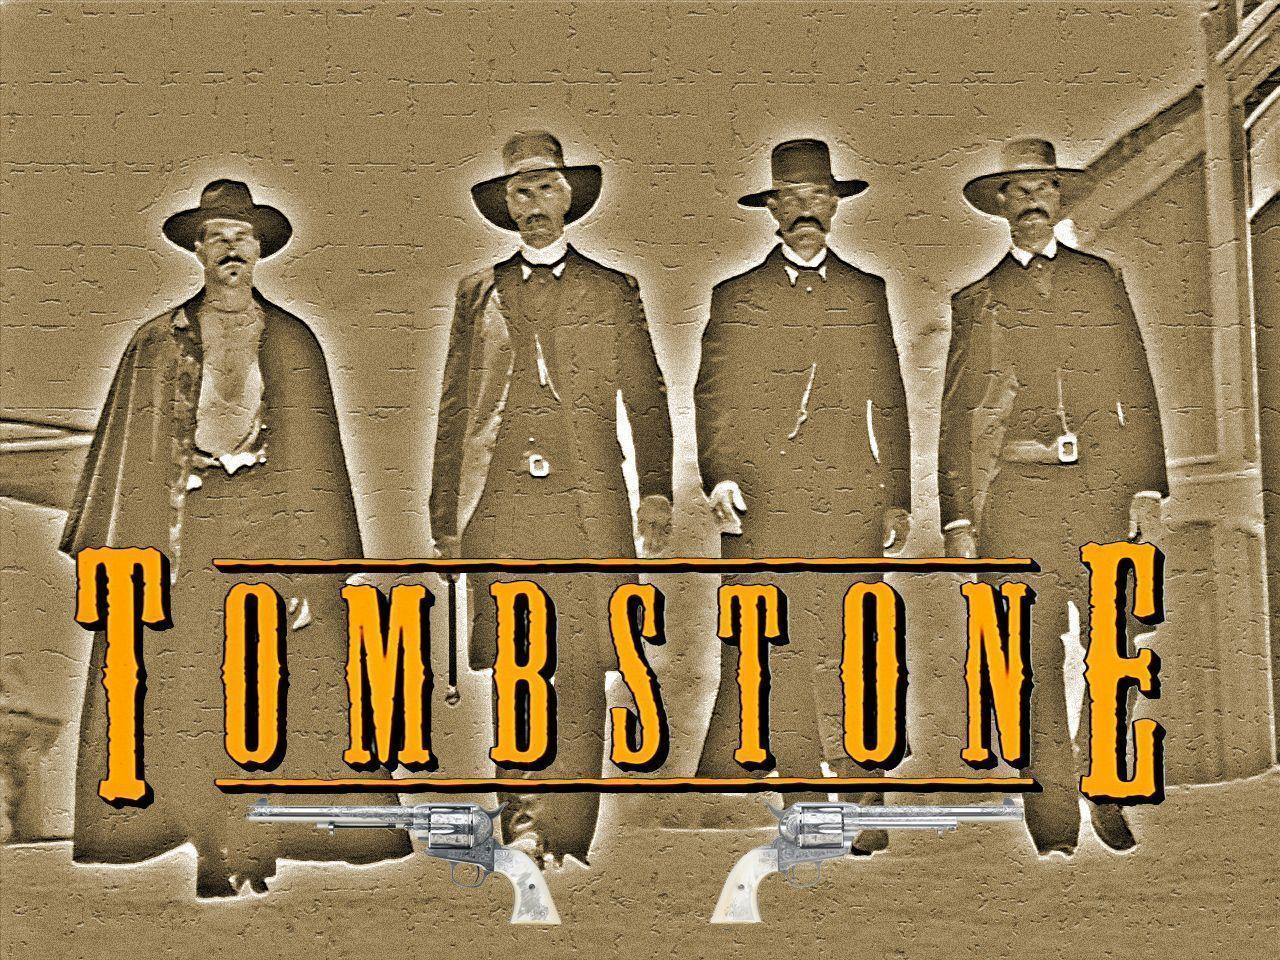 Picture From the Movie Tombstone